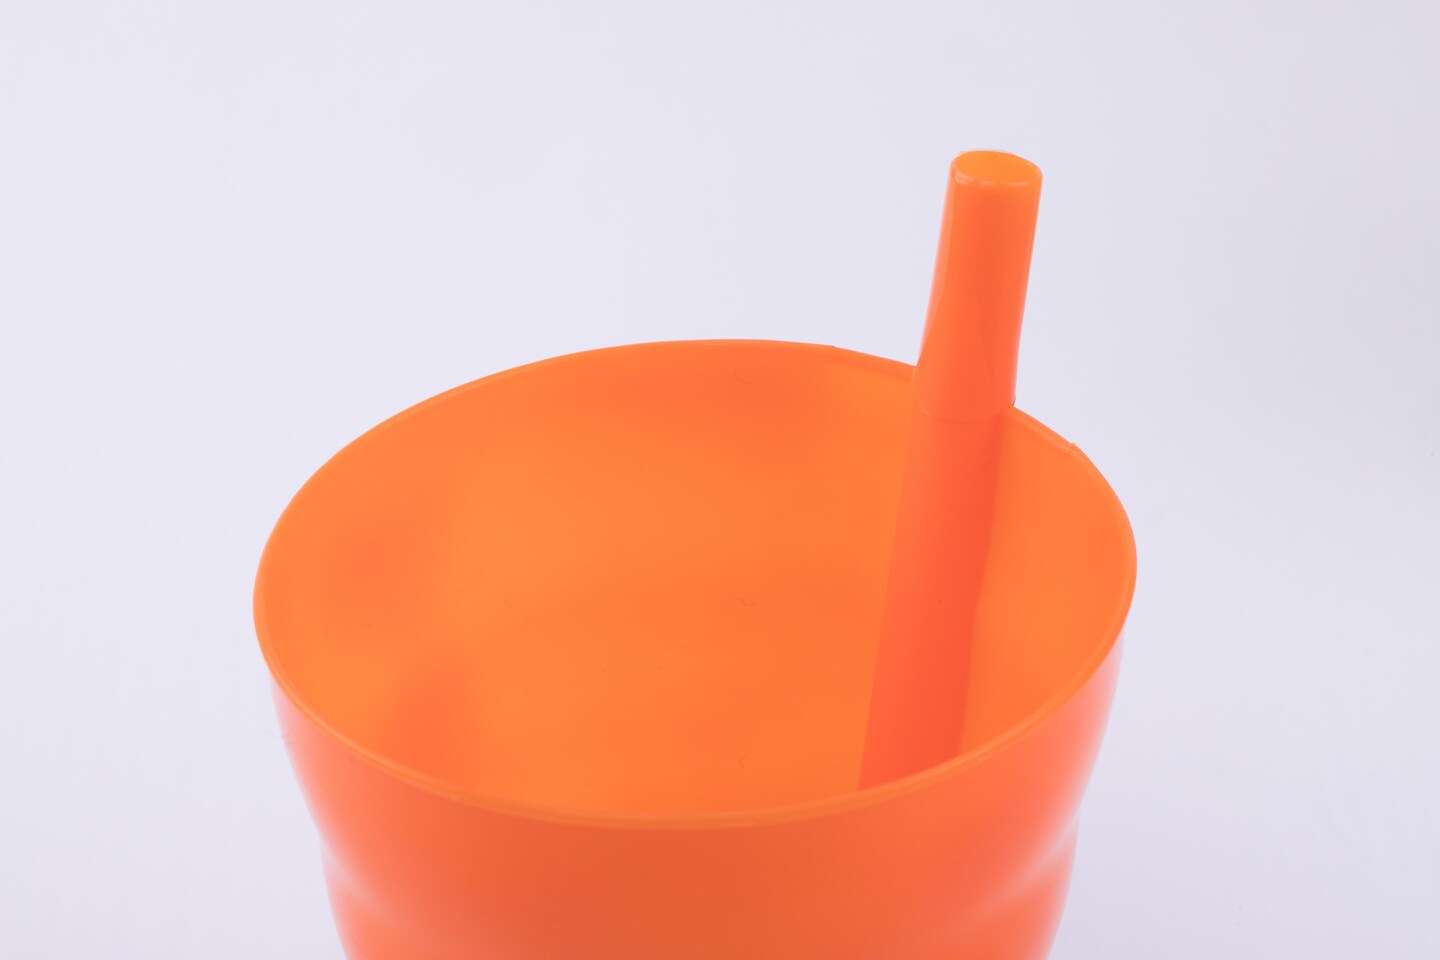 Reusable Plastic Cups with Straw